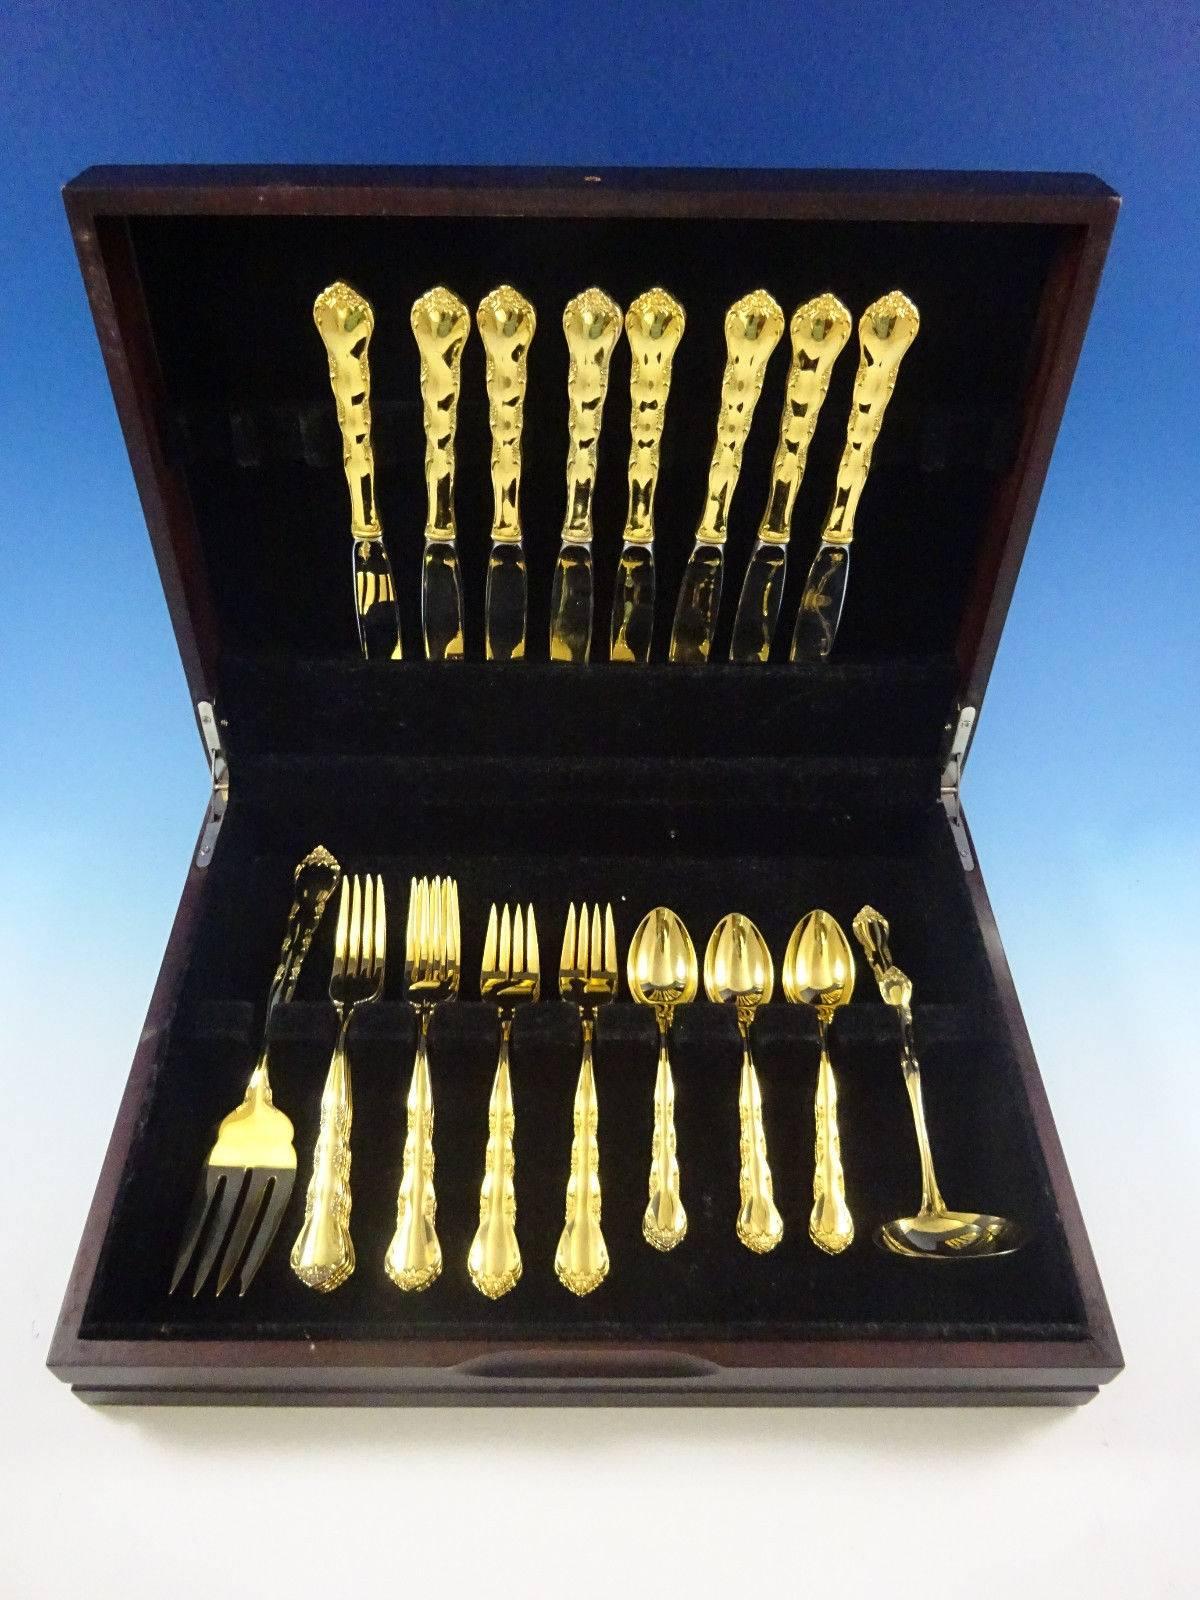 Cheryl gold by Kirk sterling silver vermeil flatware set - 35 pieces. This beautiful set is completely vermeil (gold washed). This set includes: 

eight knives, 9 1/8